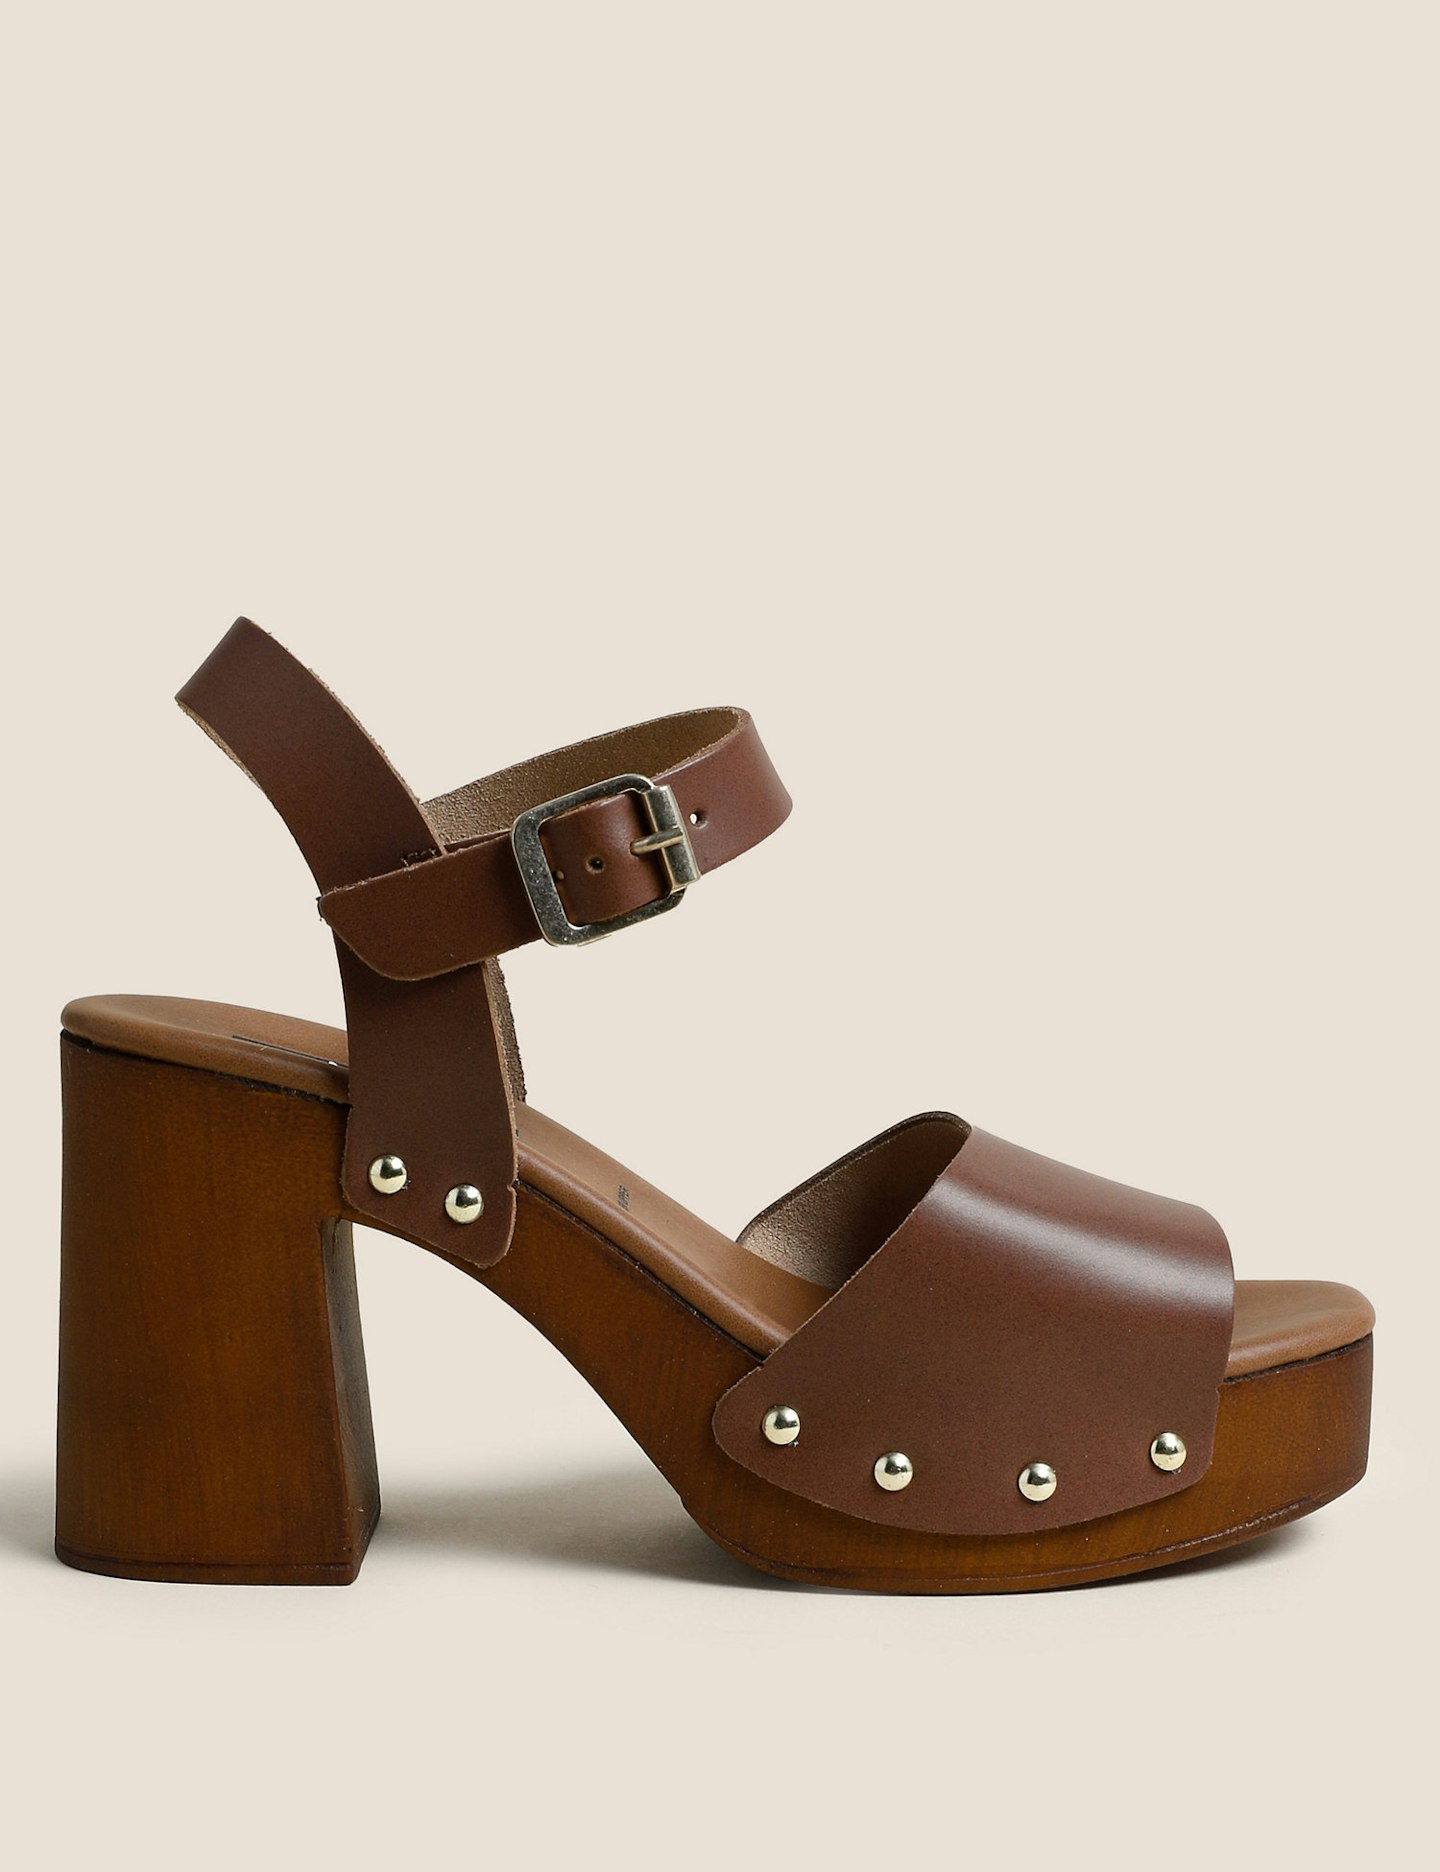 Holly Willoughby marks and Spencer summer edit Leather Buckle Platform Clogs, £49.50